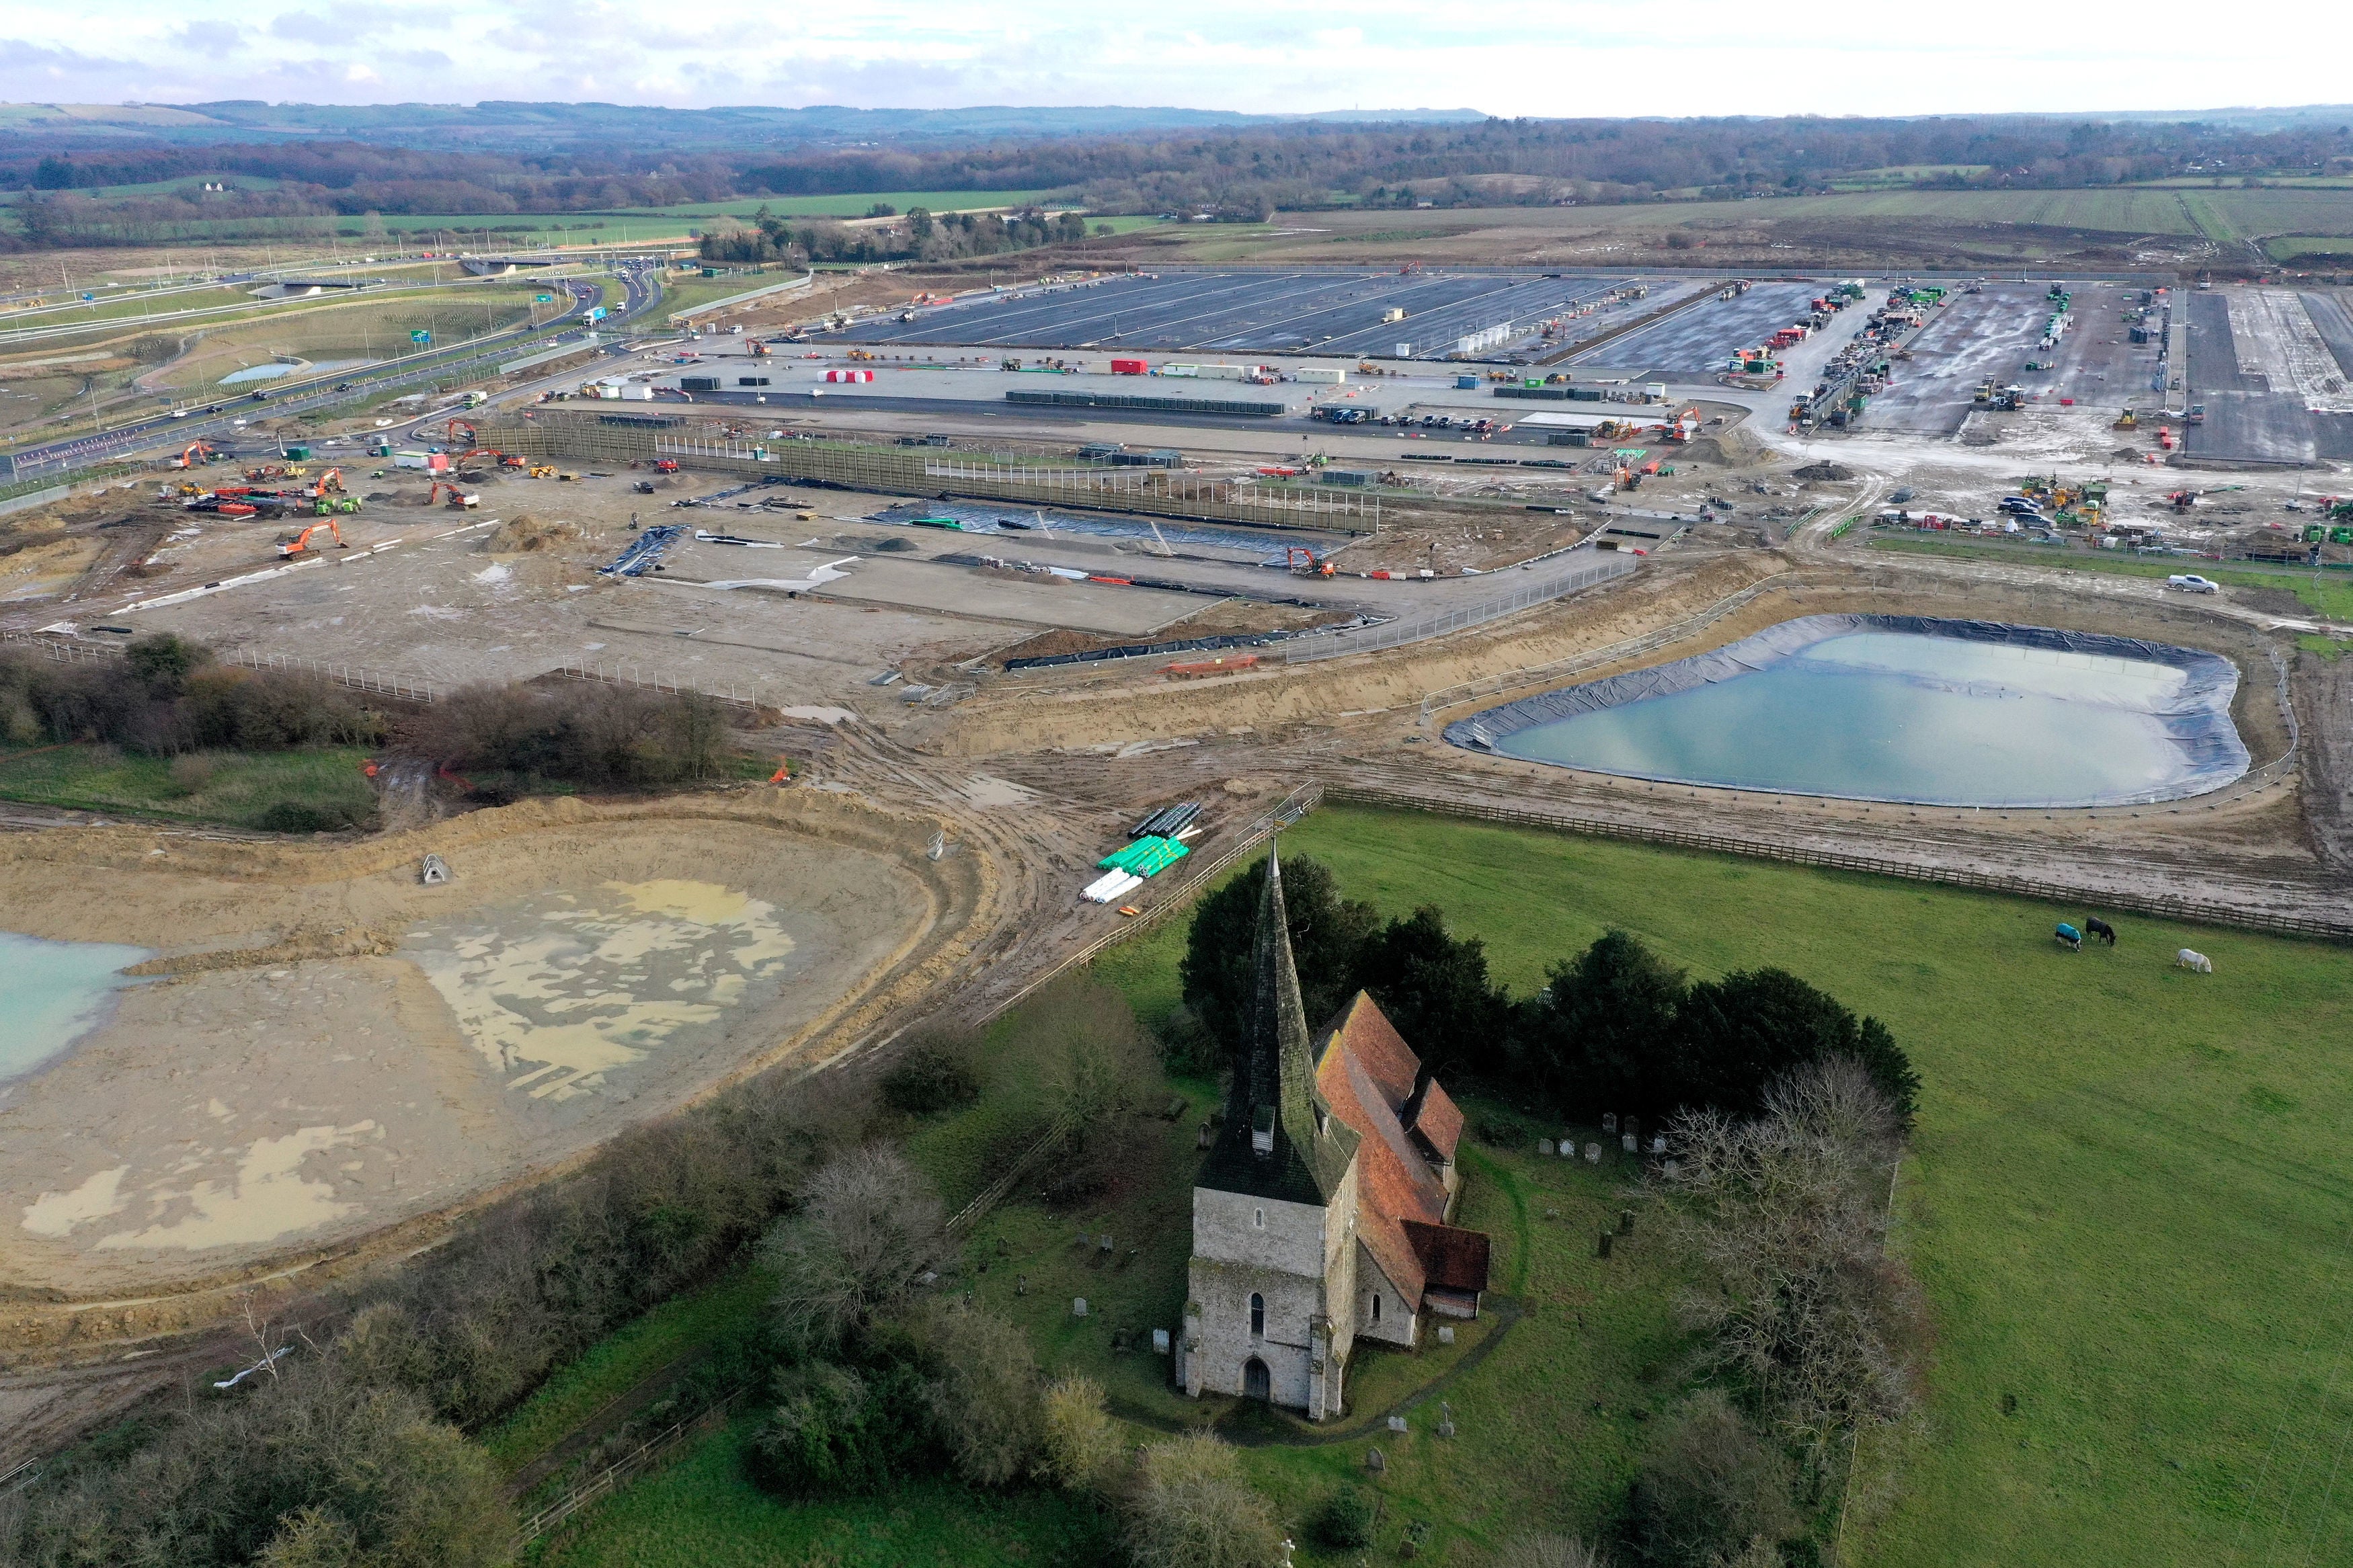 A view of St Mary’s Church and the construction work at the neighbouring Sevington inland border facility in Ashford, Kent on 6 November, 2020.